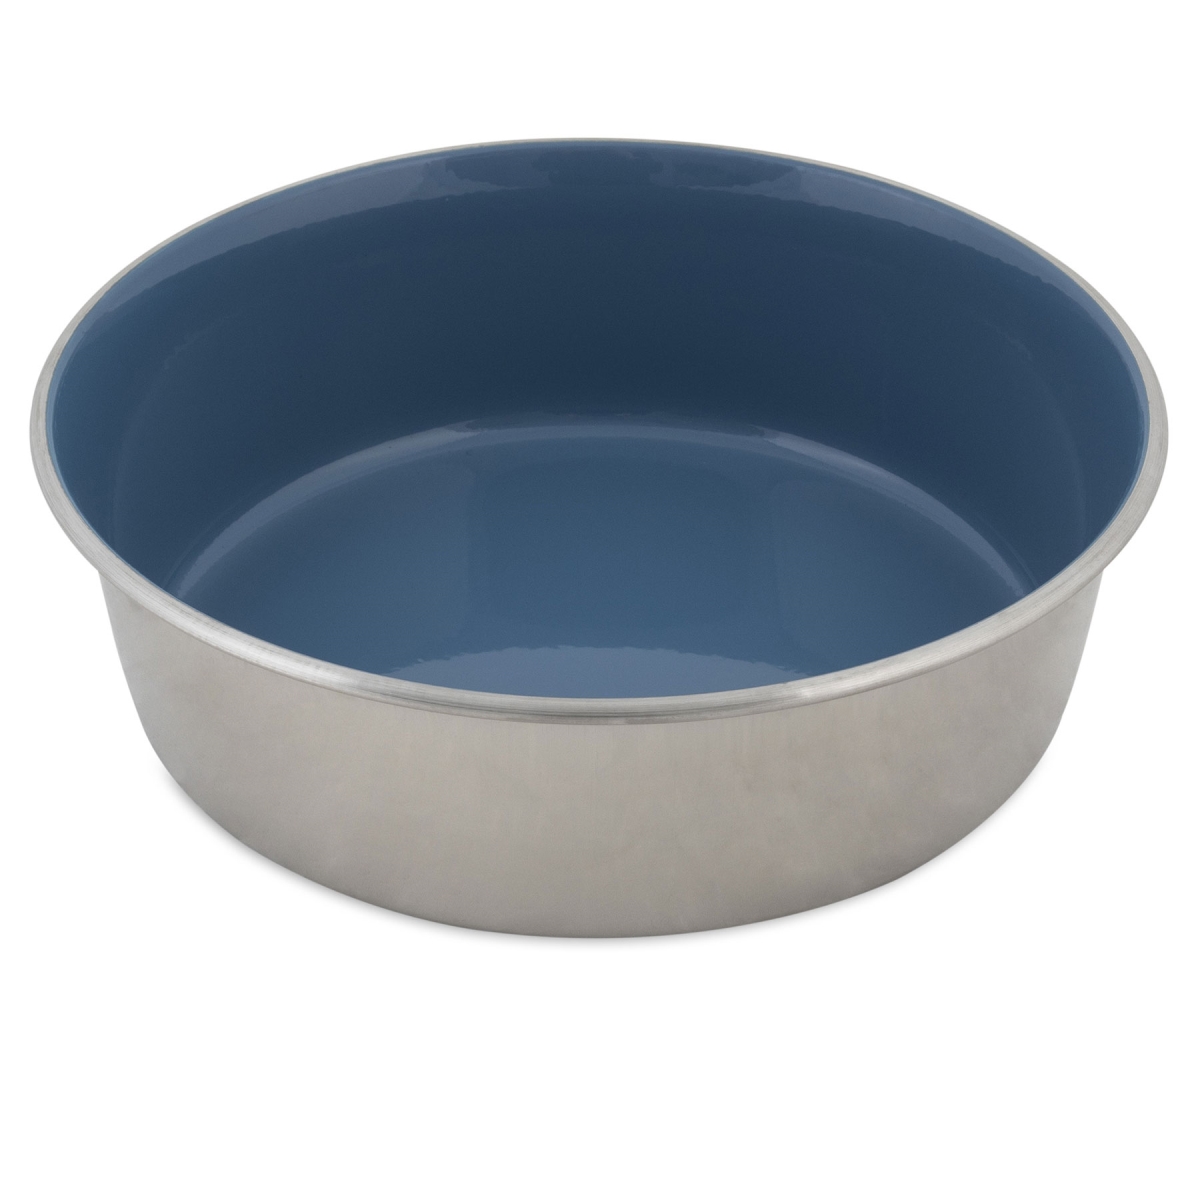 Picture of Petmate 029695341533 Painted Stainless Steel Pet Bowls - Vallarta Blue - 12 Piece